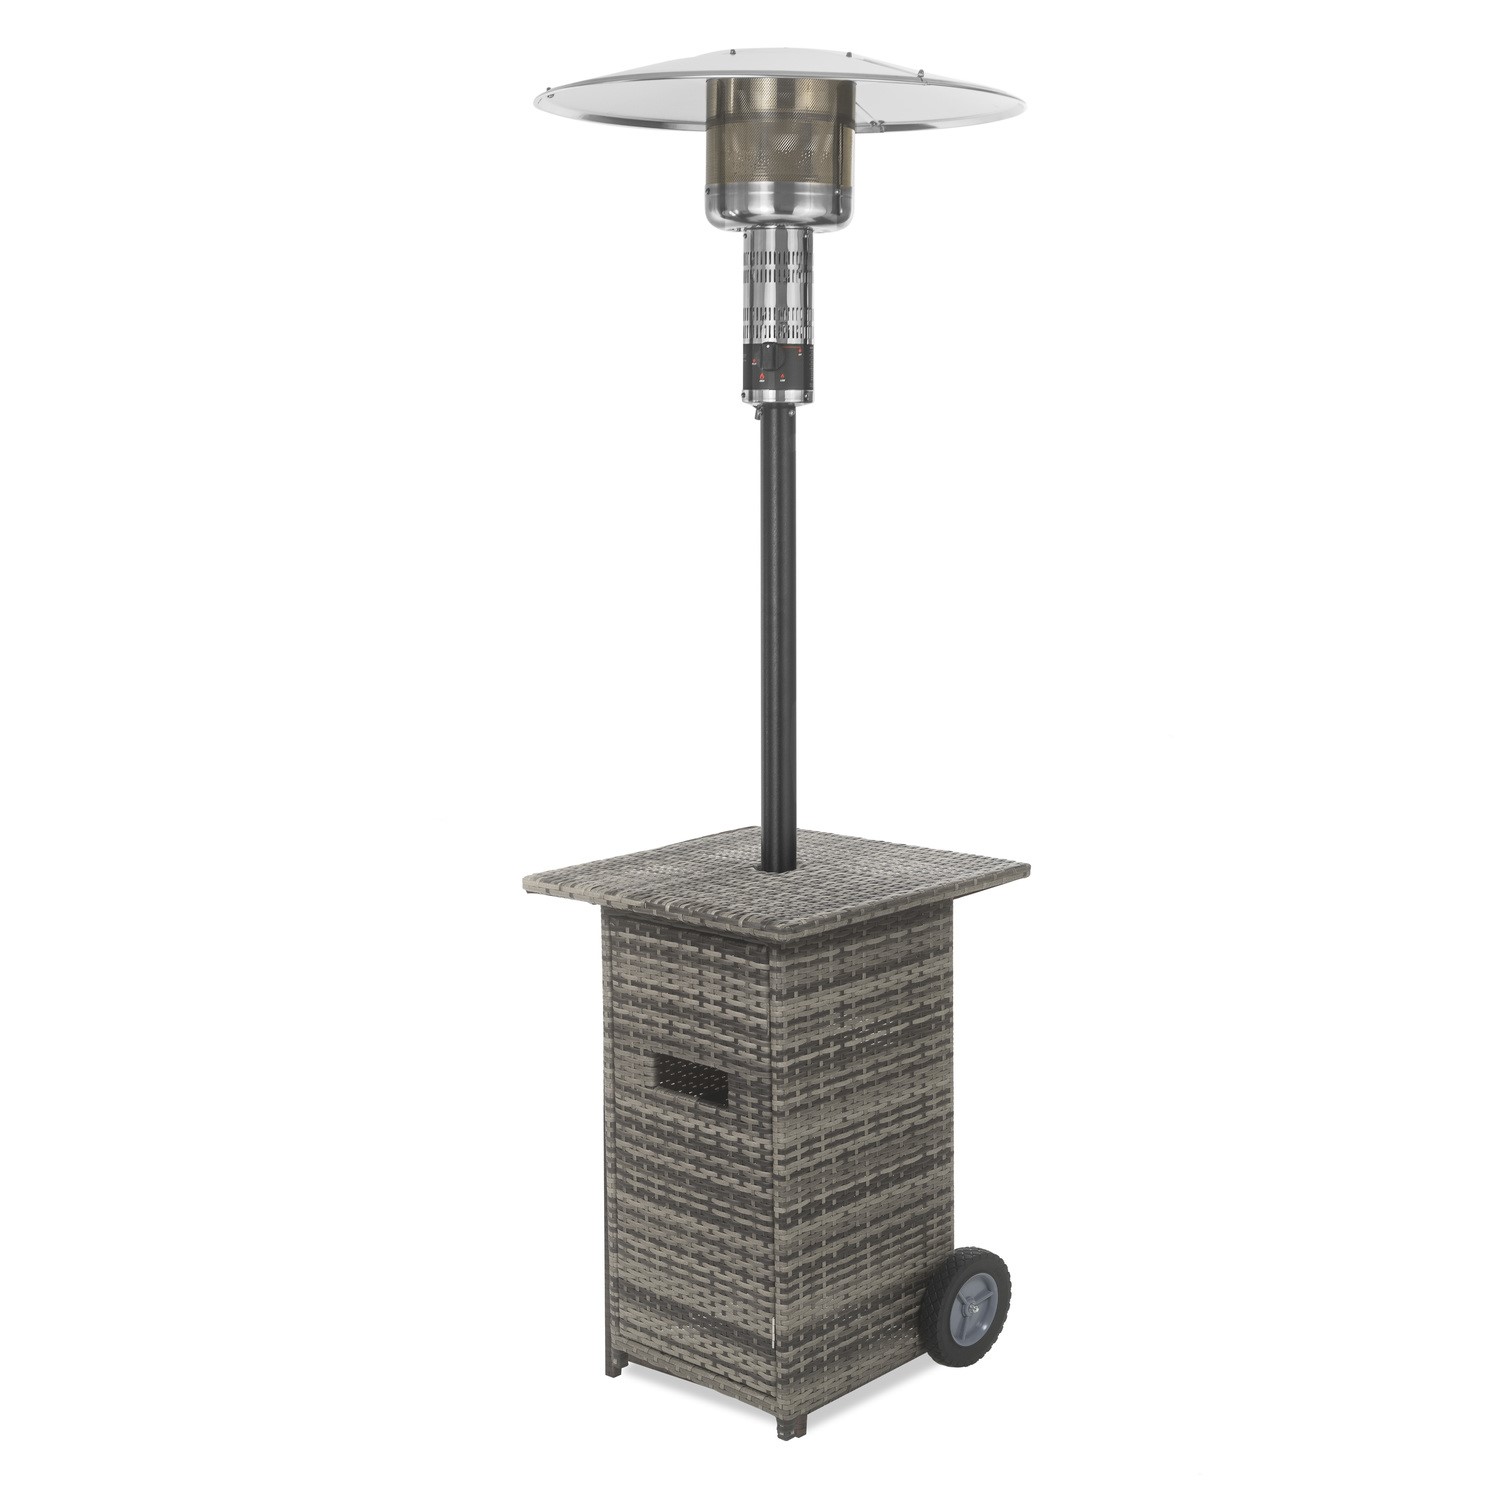 Refurbished electriQ EQODHMGR Mushroom Outdoor Gas Patio Heater Grey Wicker/Rattan with Free Cover